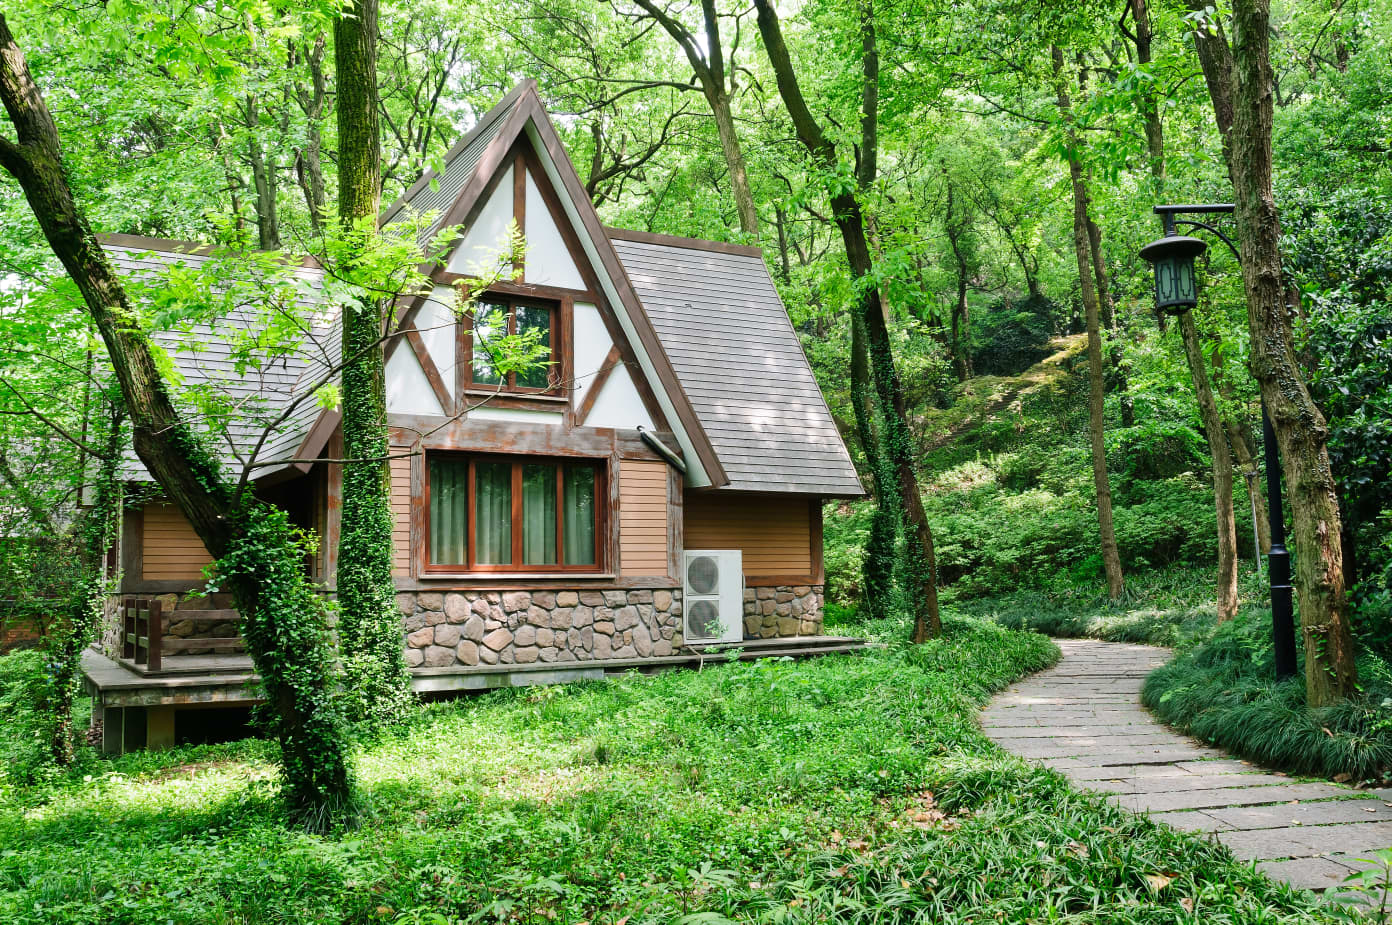 6 Things You Should Really Ask Before Buying a Home on a Wooded Lot